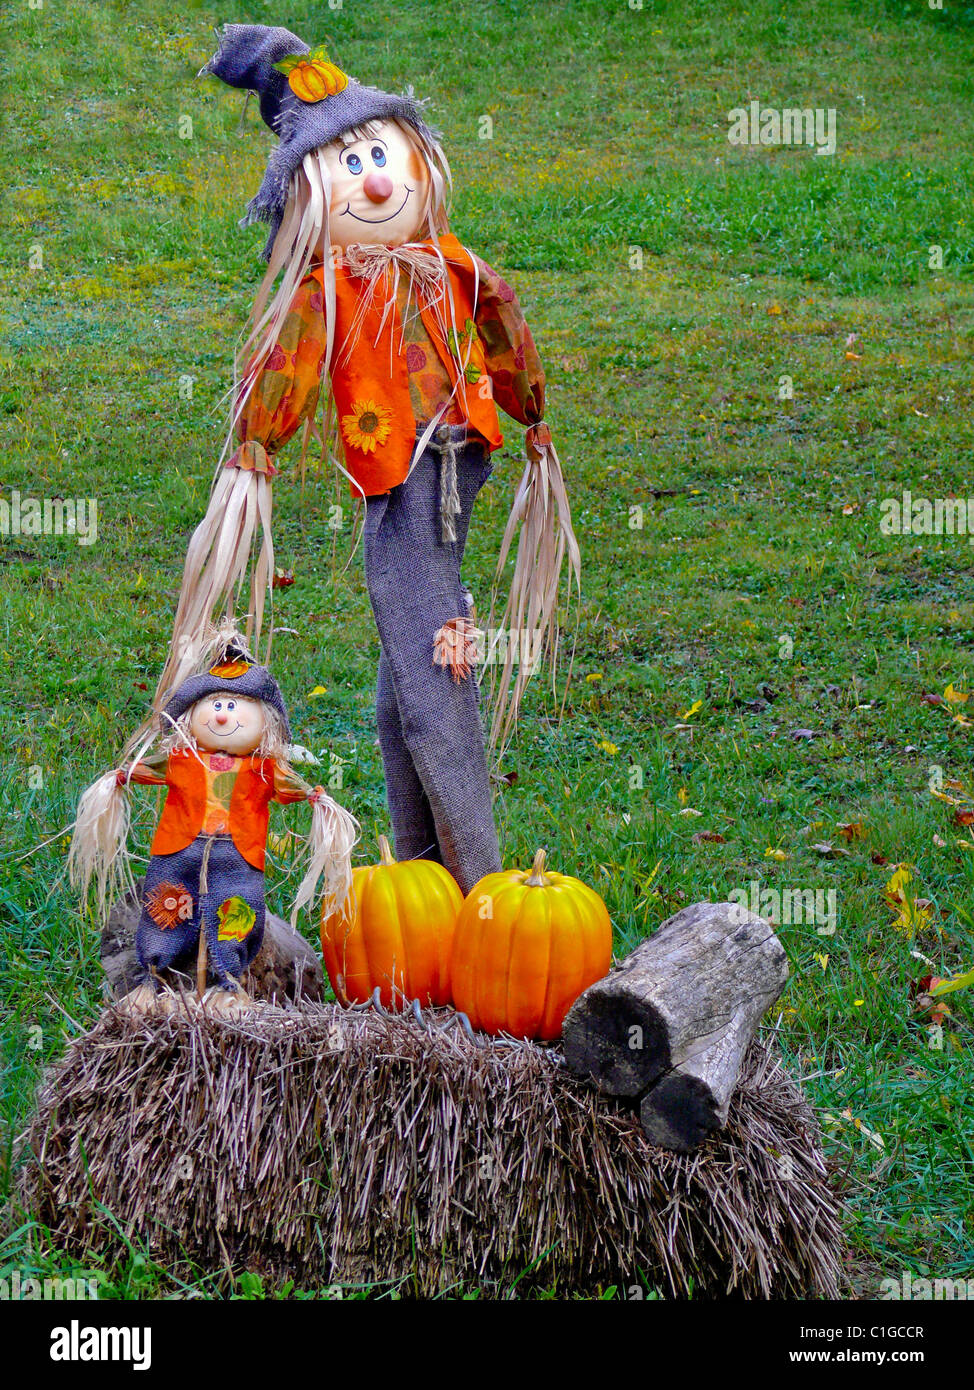 Two Scarecrows in a Field Stock Photo